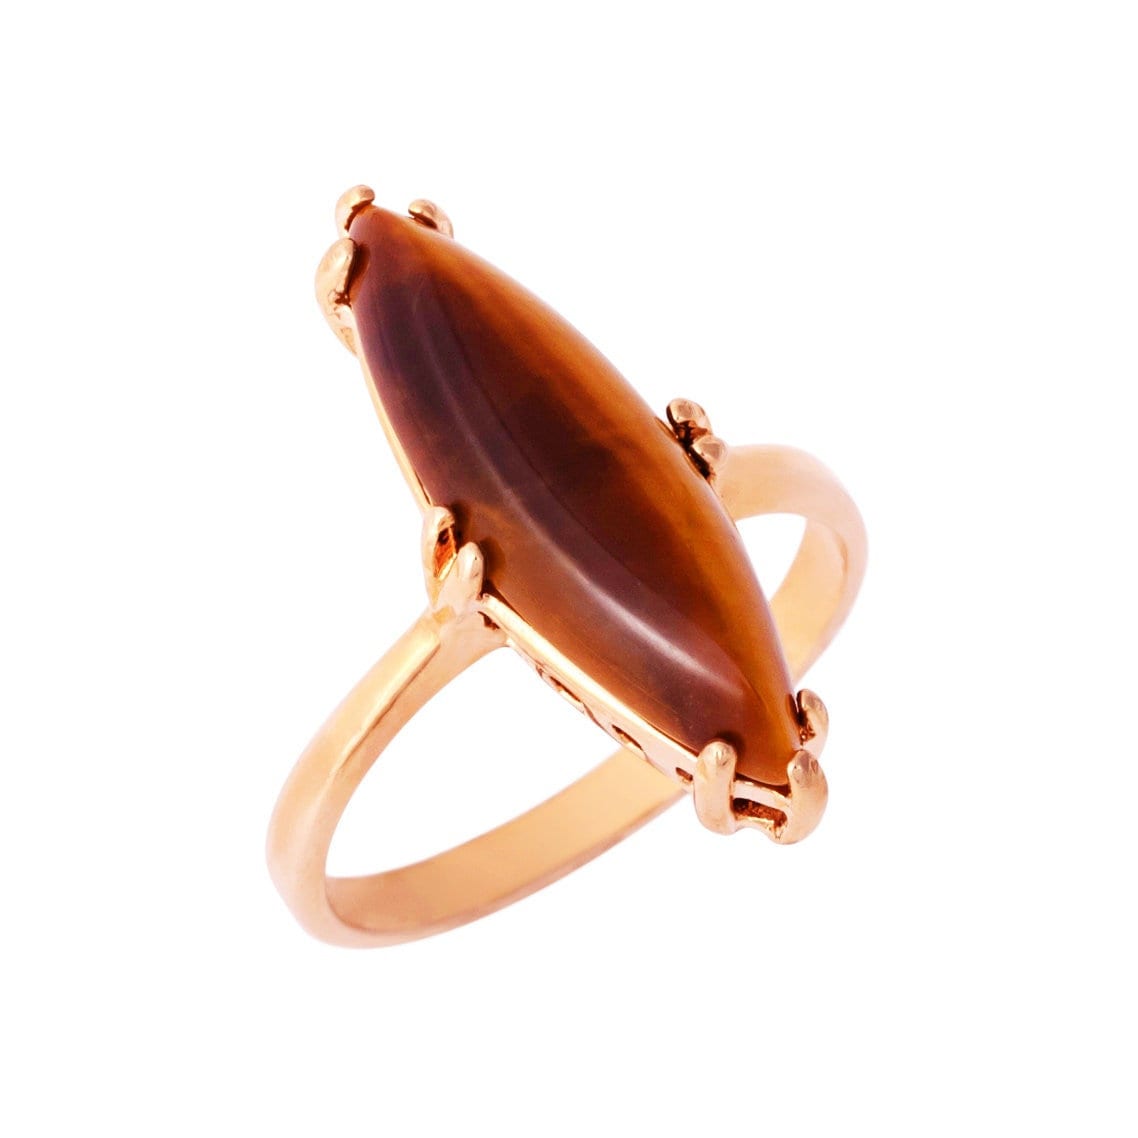 Women's Vintage Rings Genuine Tiger Eye Antique Ring 18k Gold #R1019 Antique Woman Jewelry - Limited Stock - Never Worn